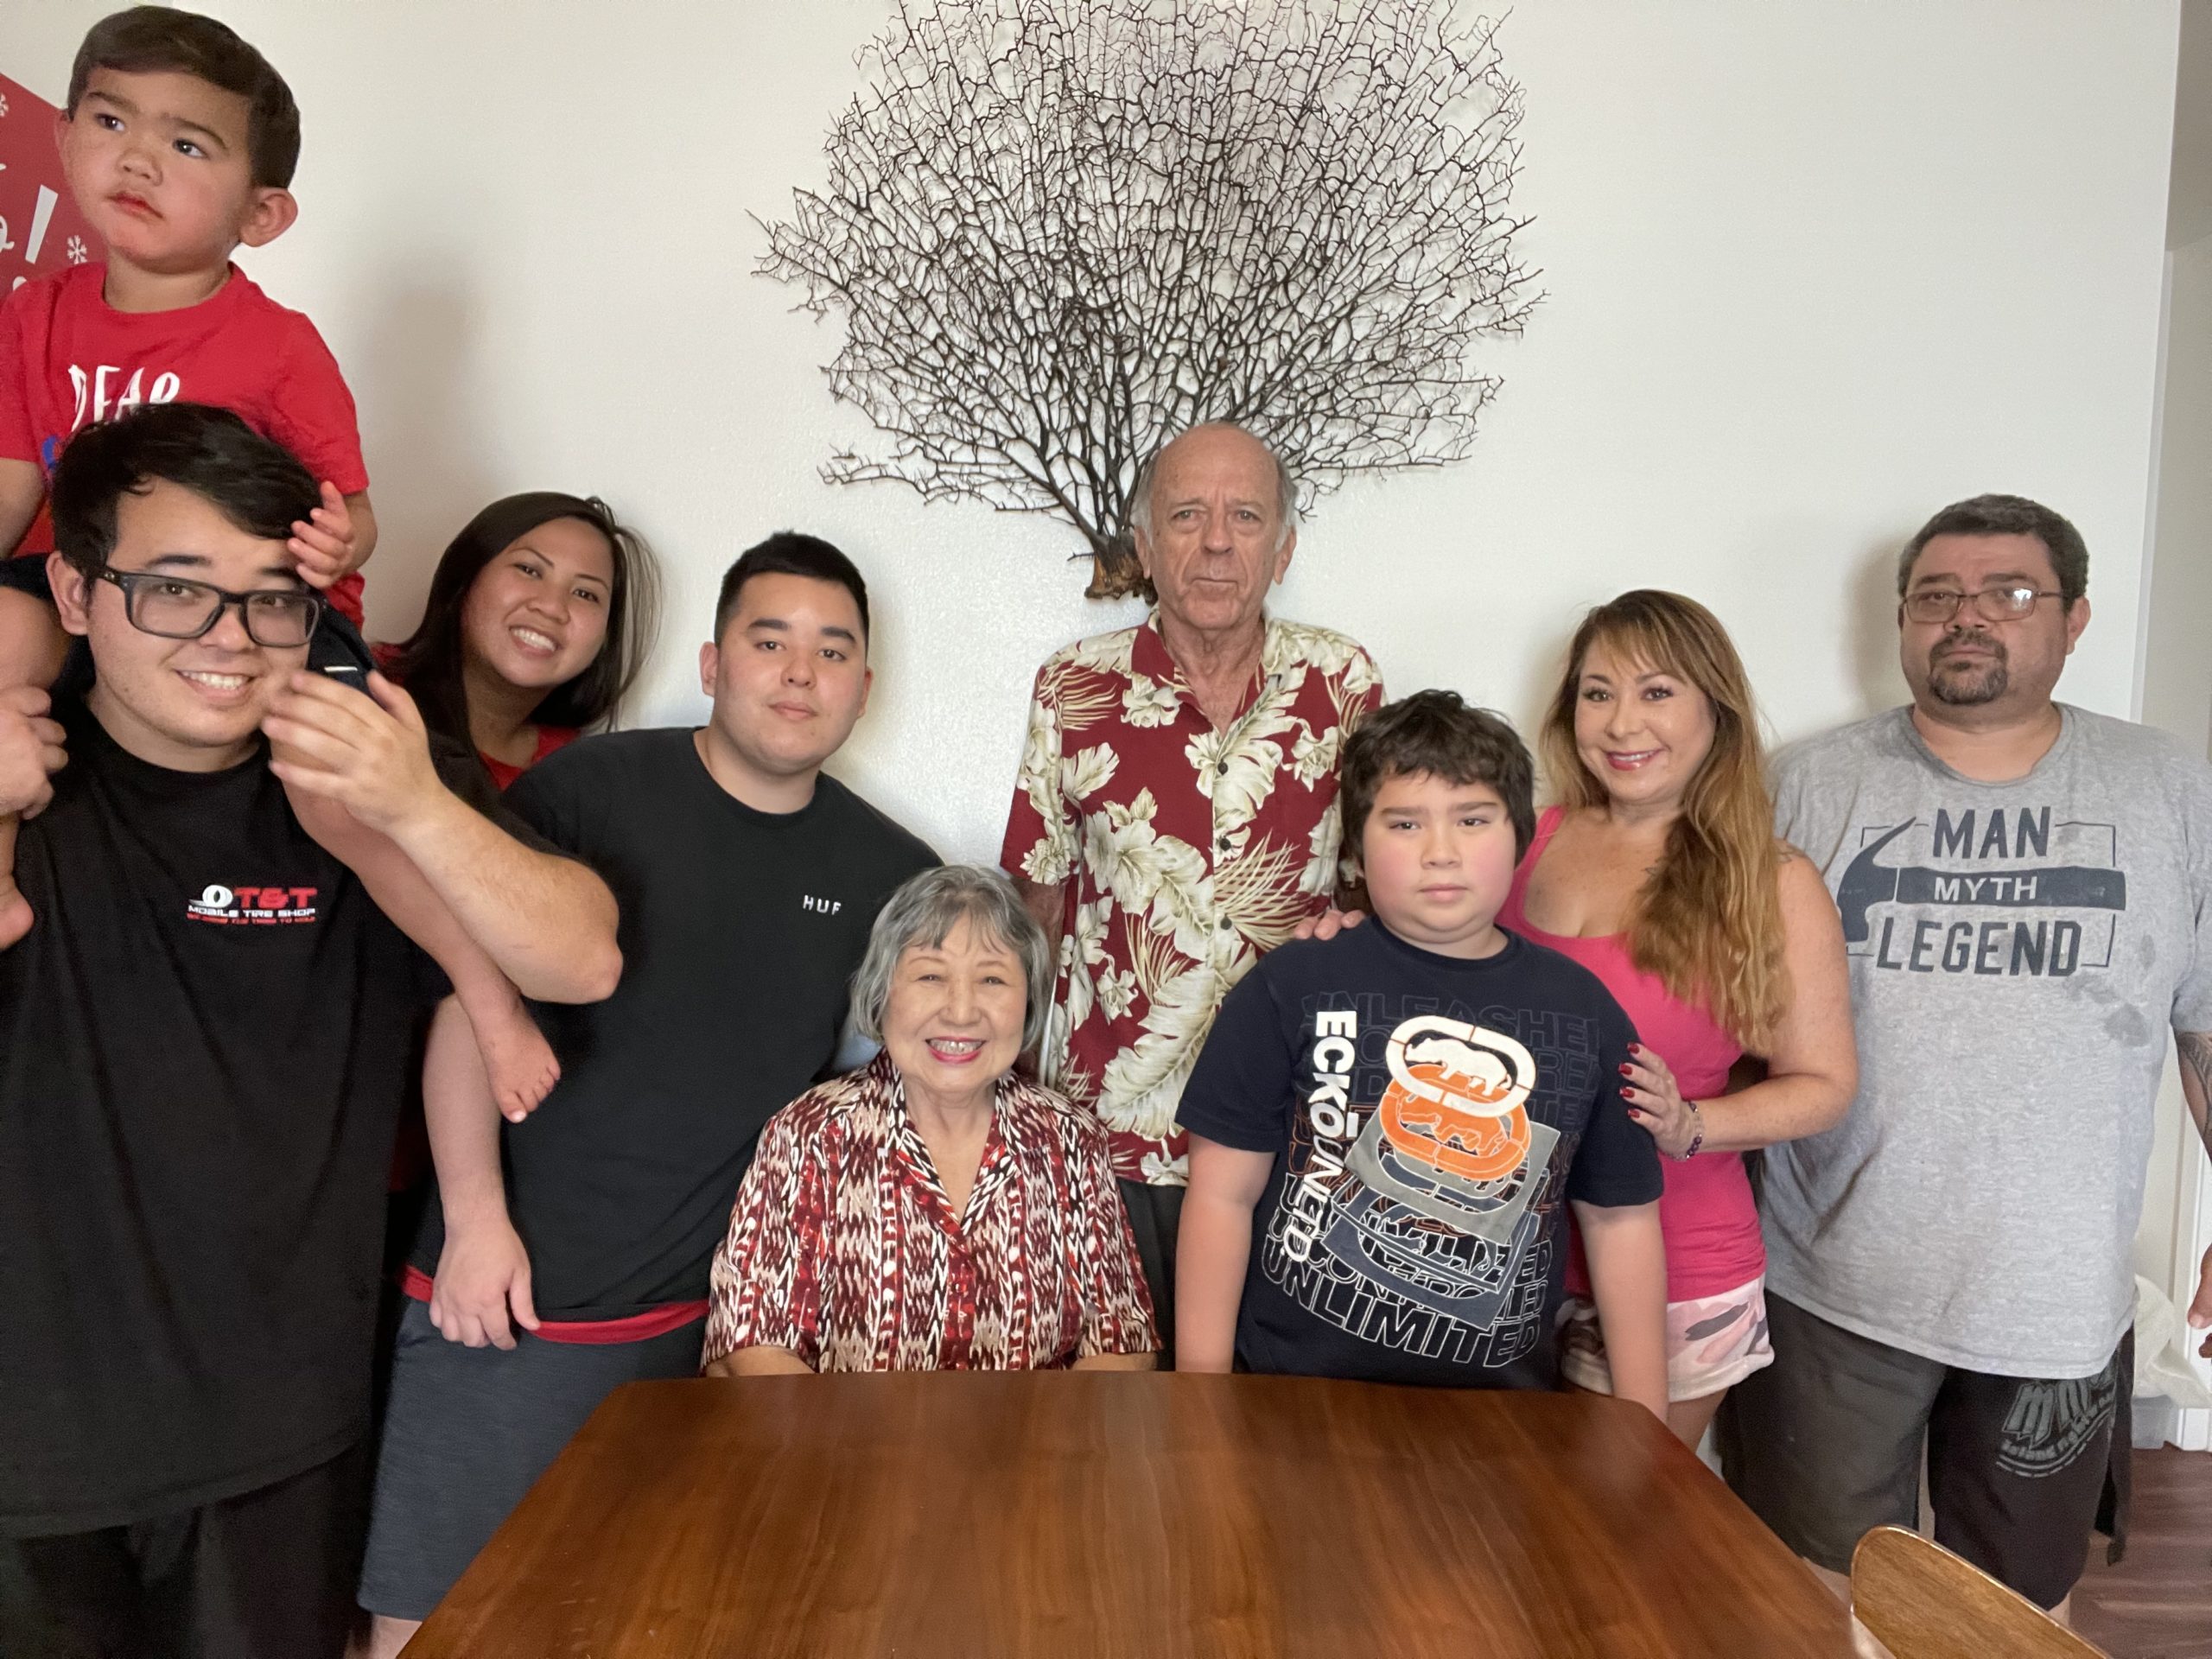 Teruko Dent creates a happy family through her Buddhist practice despite facing tremendous challenges. “I decided to fight for our family and transform the situation,” she said. Mrs. Dent pictured with her husband, Von, children and their families.